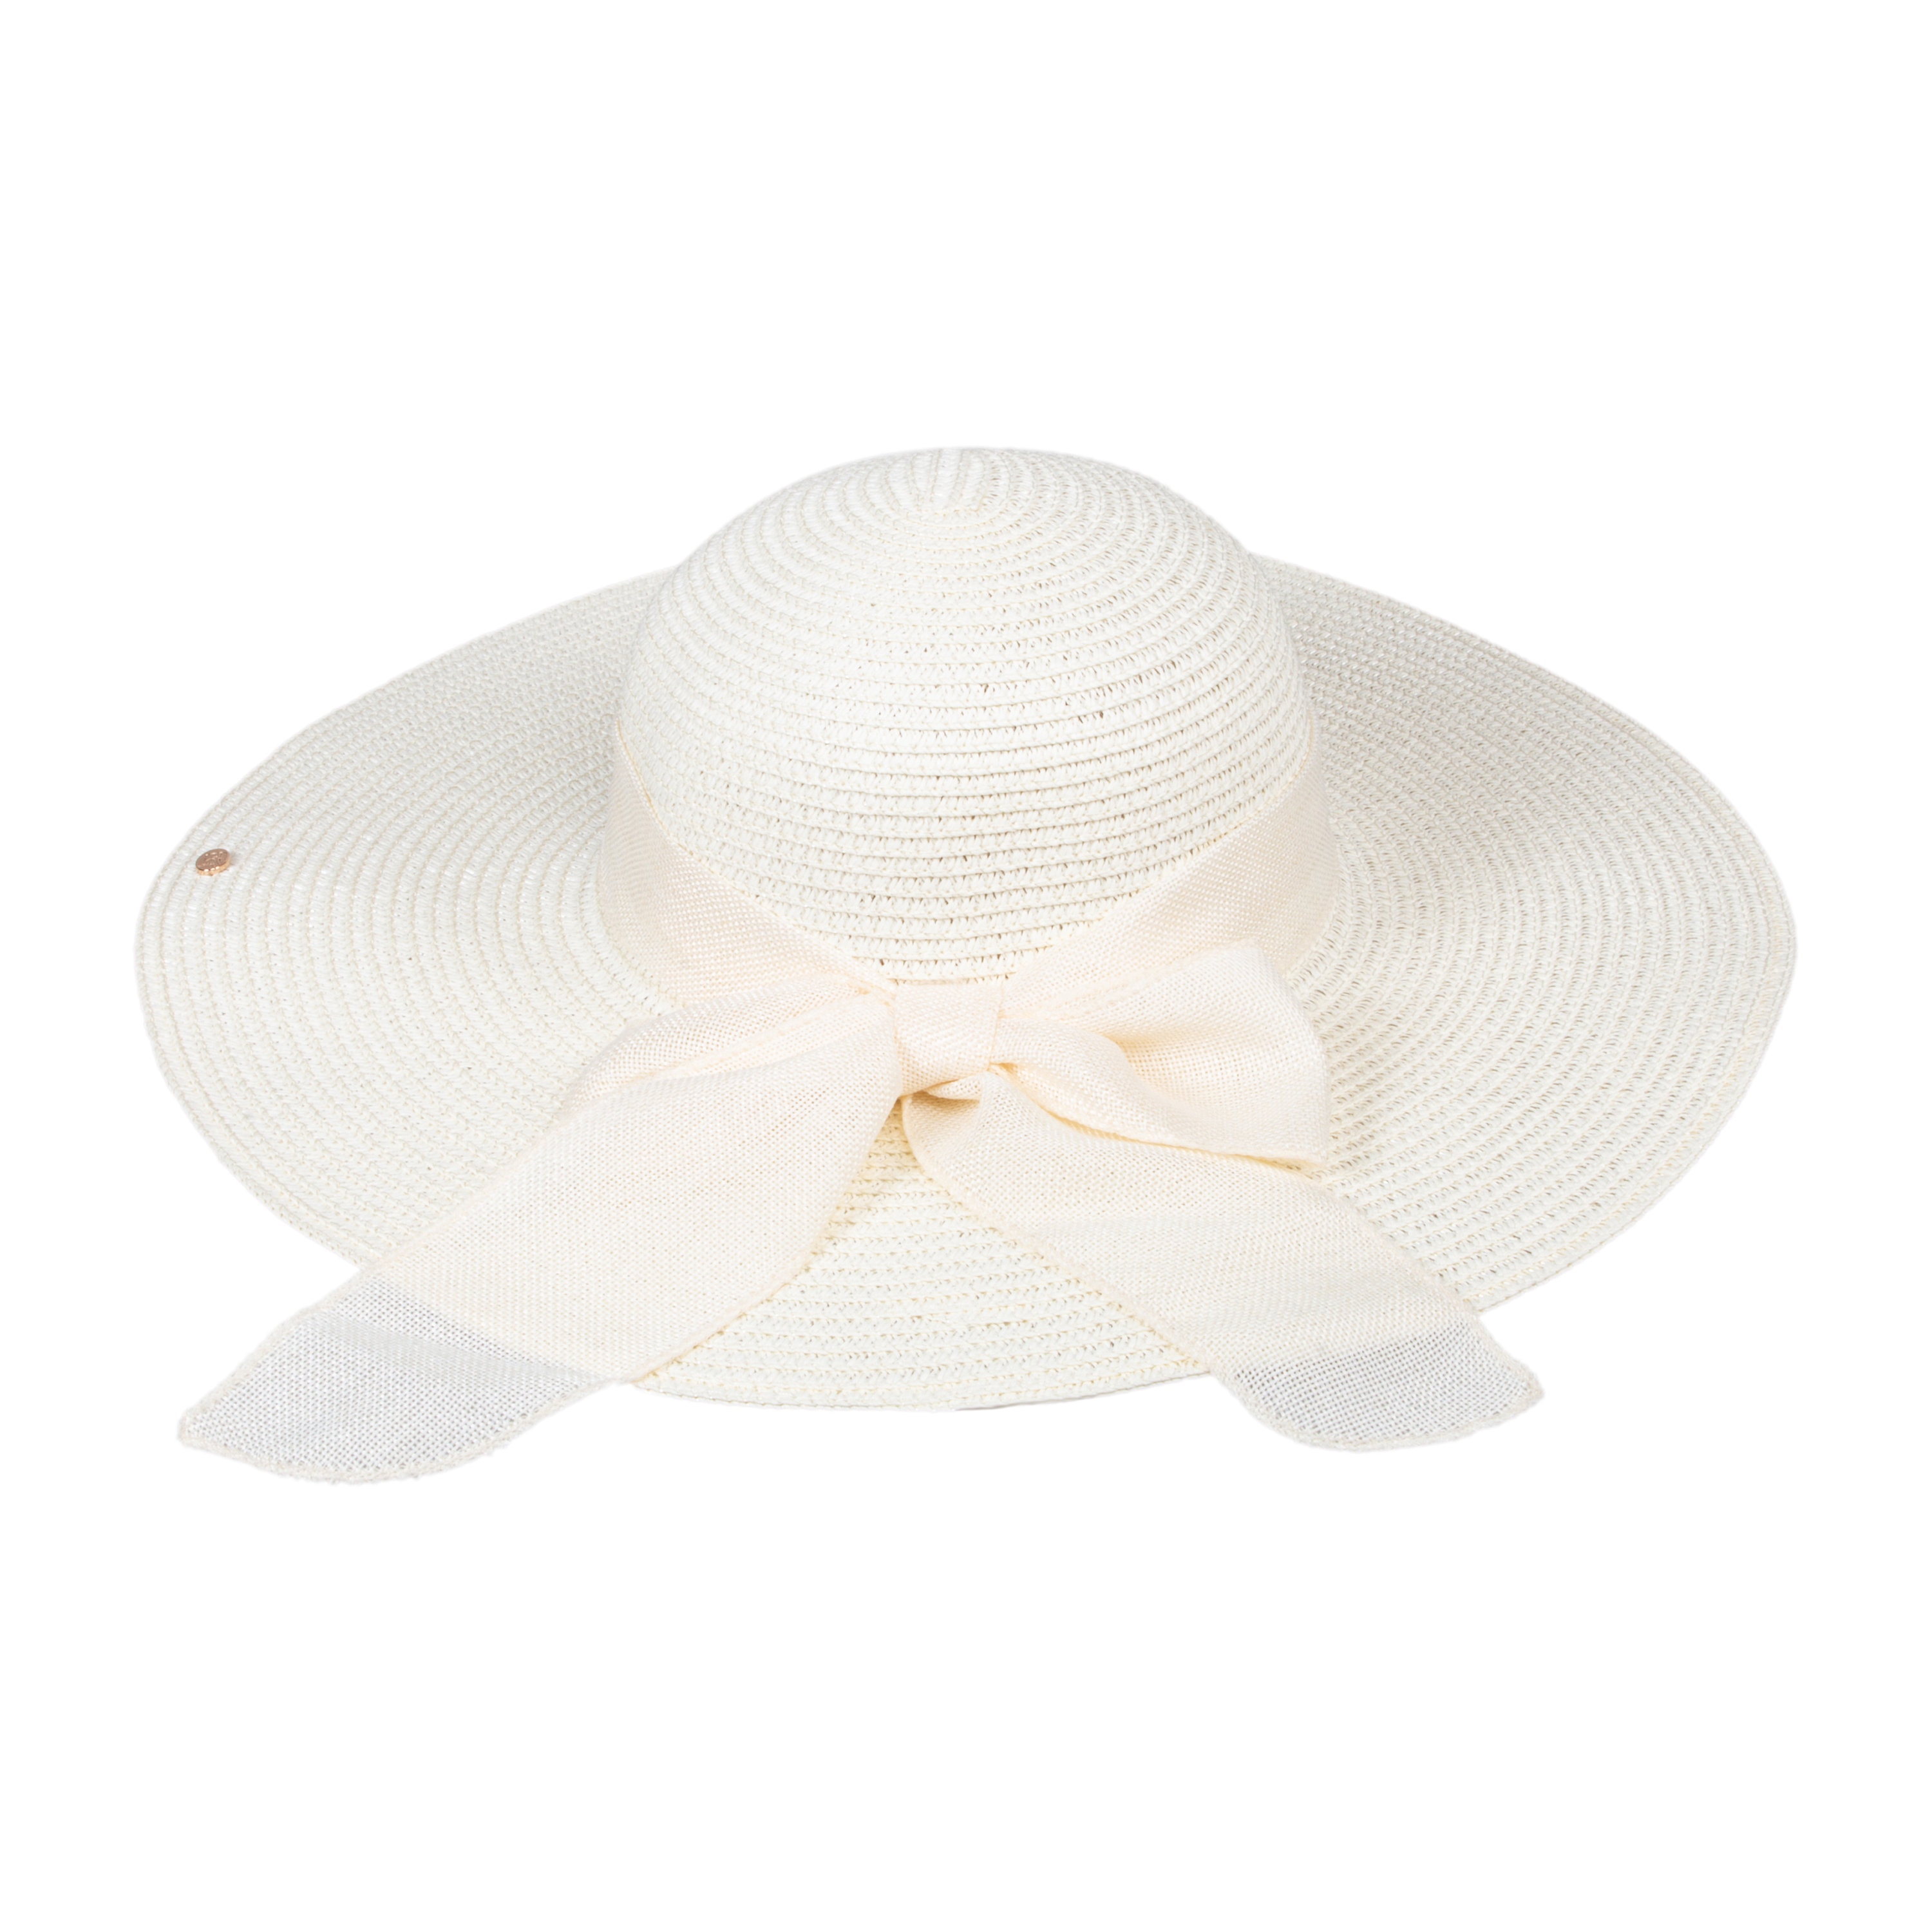 Ivory Romantic Vintage Style Wide Brim Straw Hat, Holiday Hat